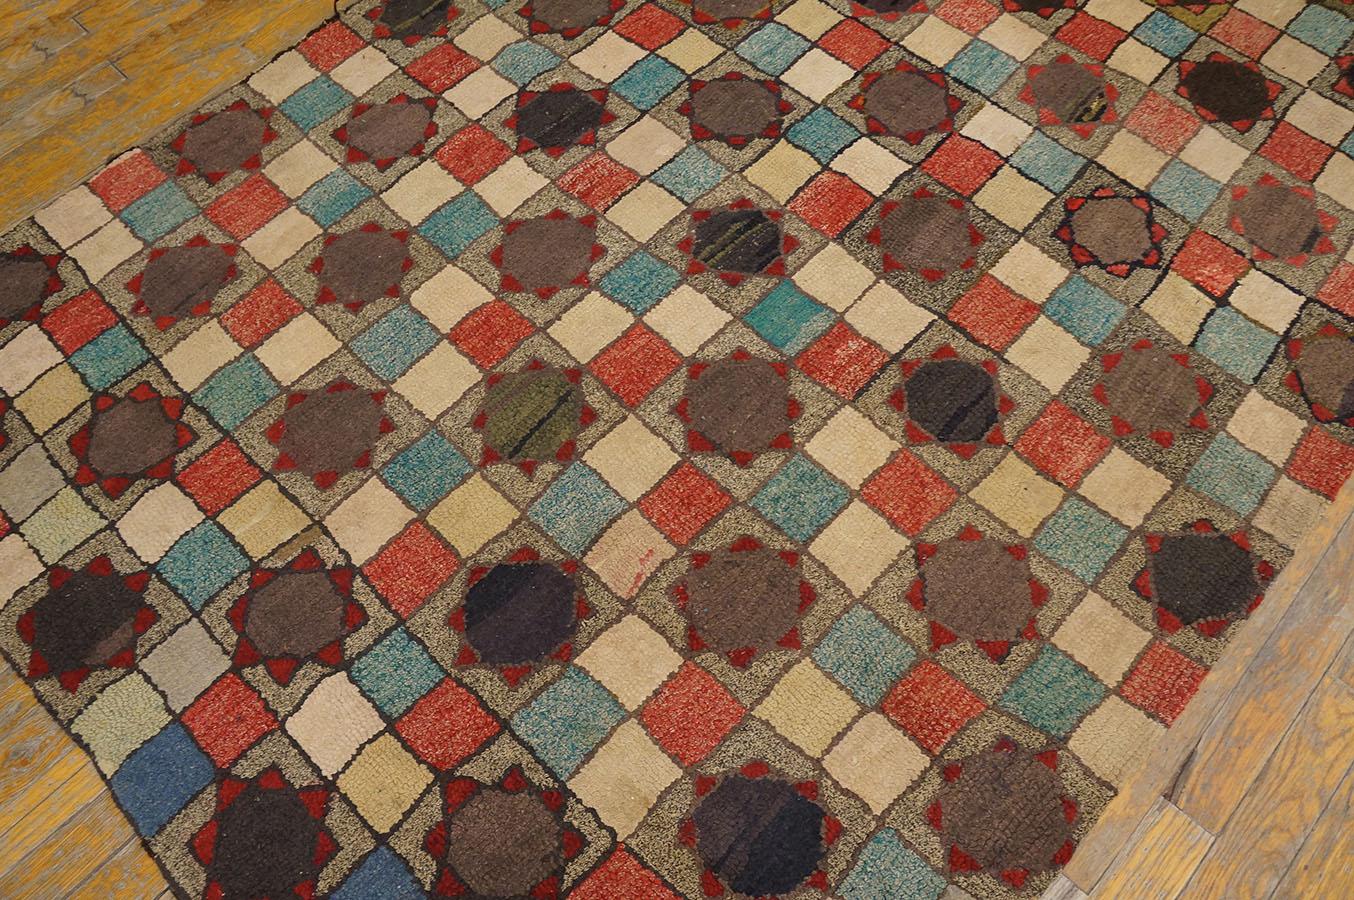 1920s American Hooked Rug ( 4'4'' x 6'6'' - 132 x 198 ) For Sale 8